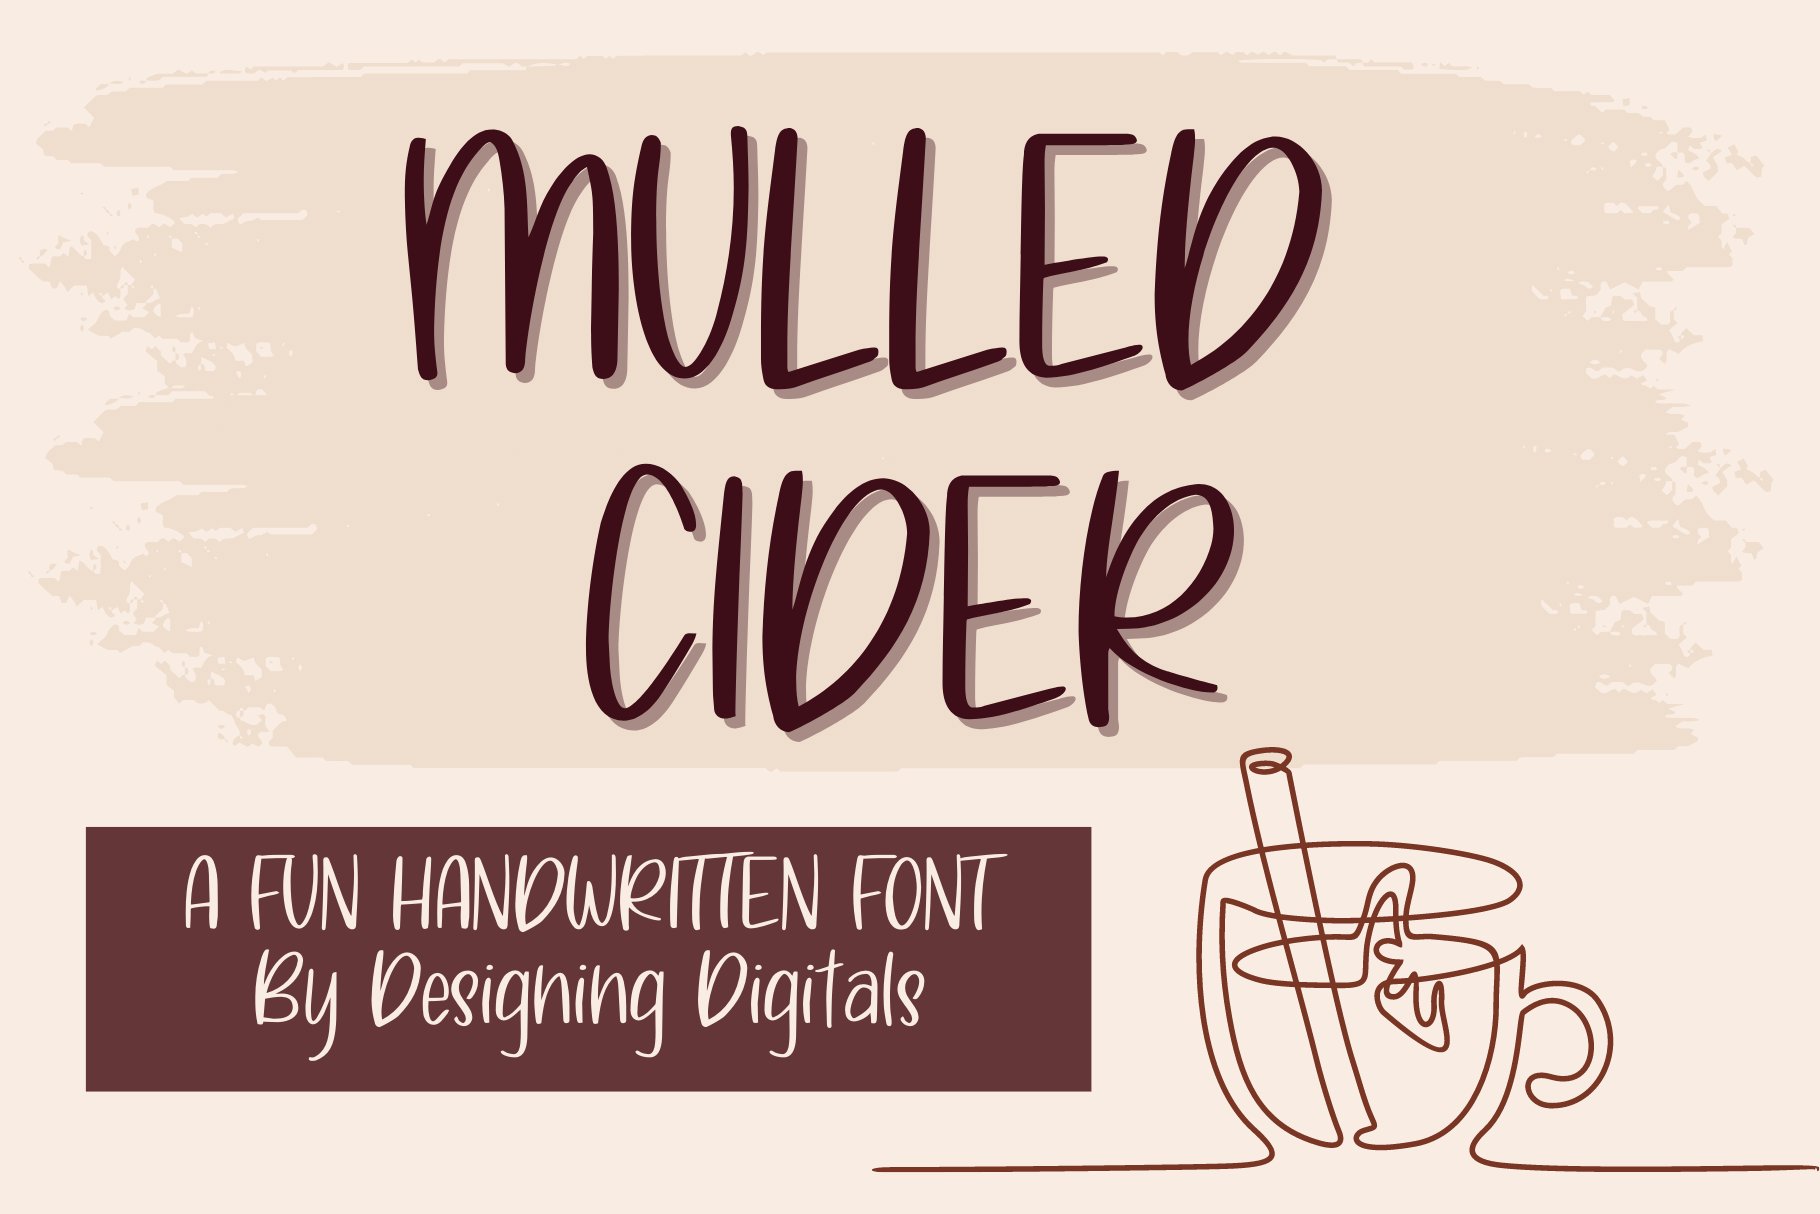 Mulled Cider - Fun Handwritten Font cover image.